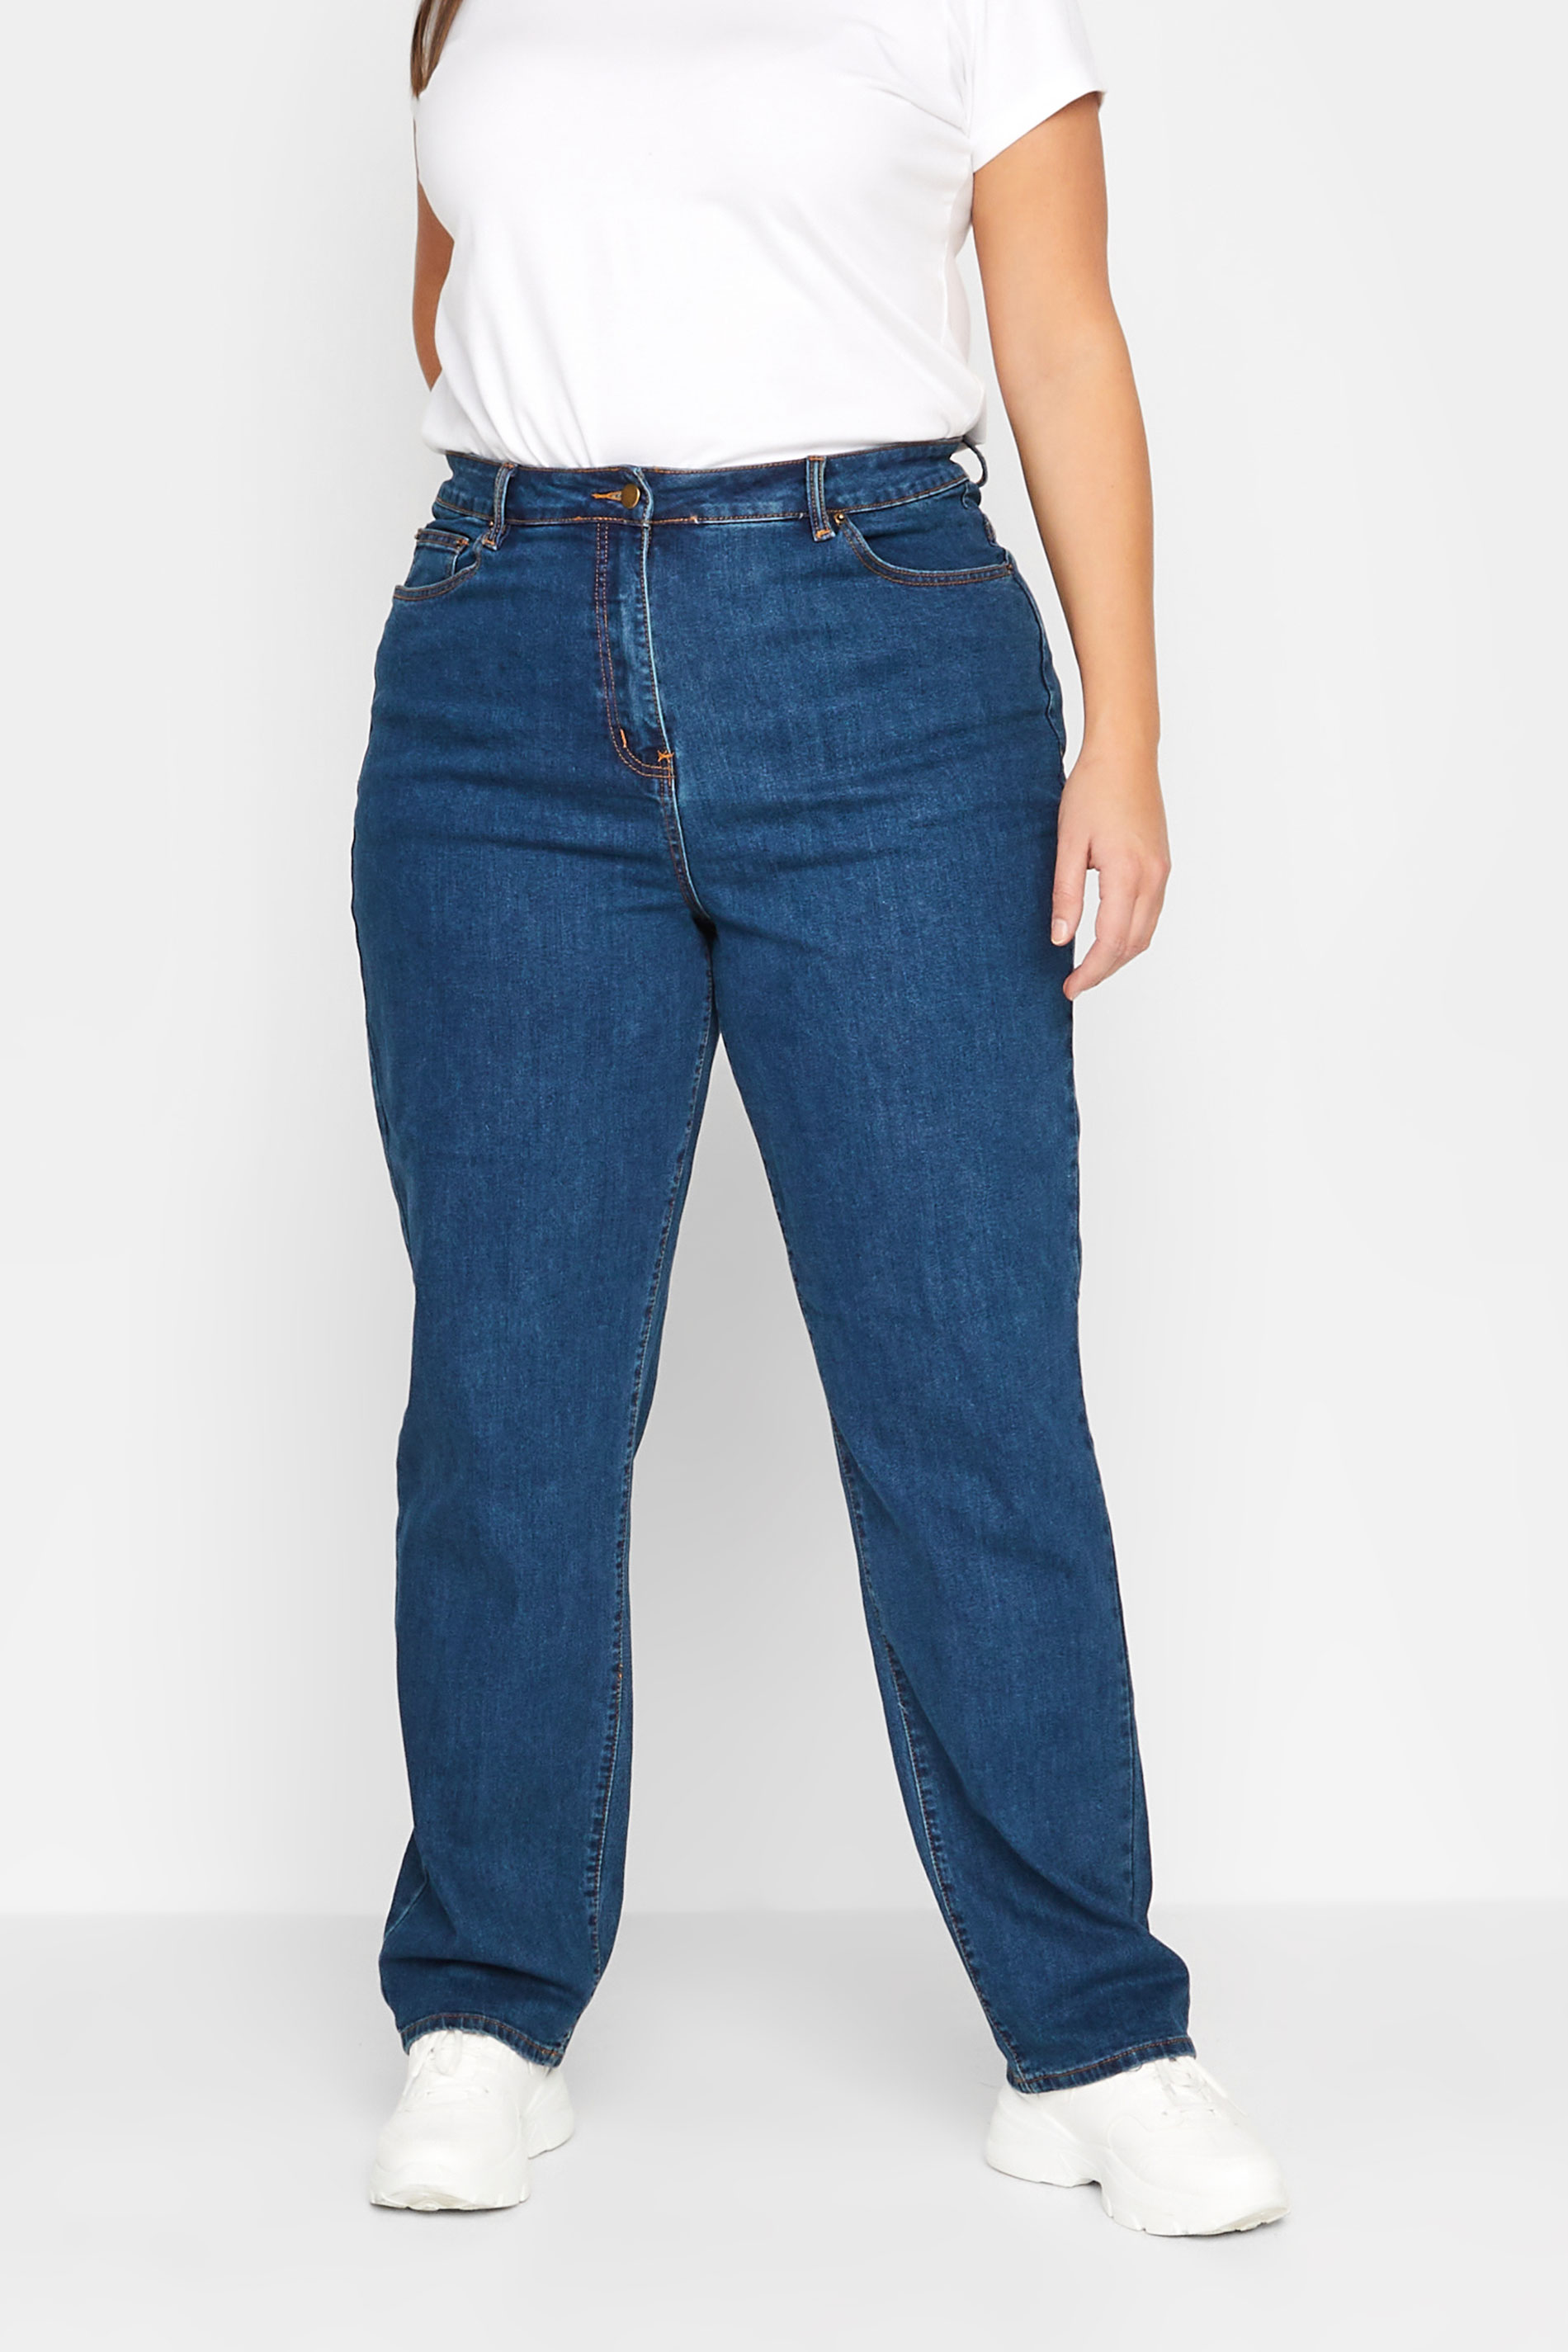 LTS Tall Women's Indigo Blue Washed UNA Mom Jeans | Long Tall Sally 1